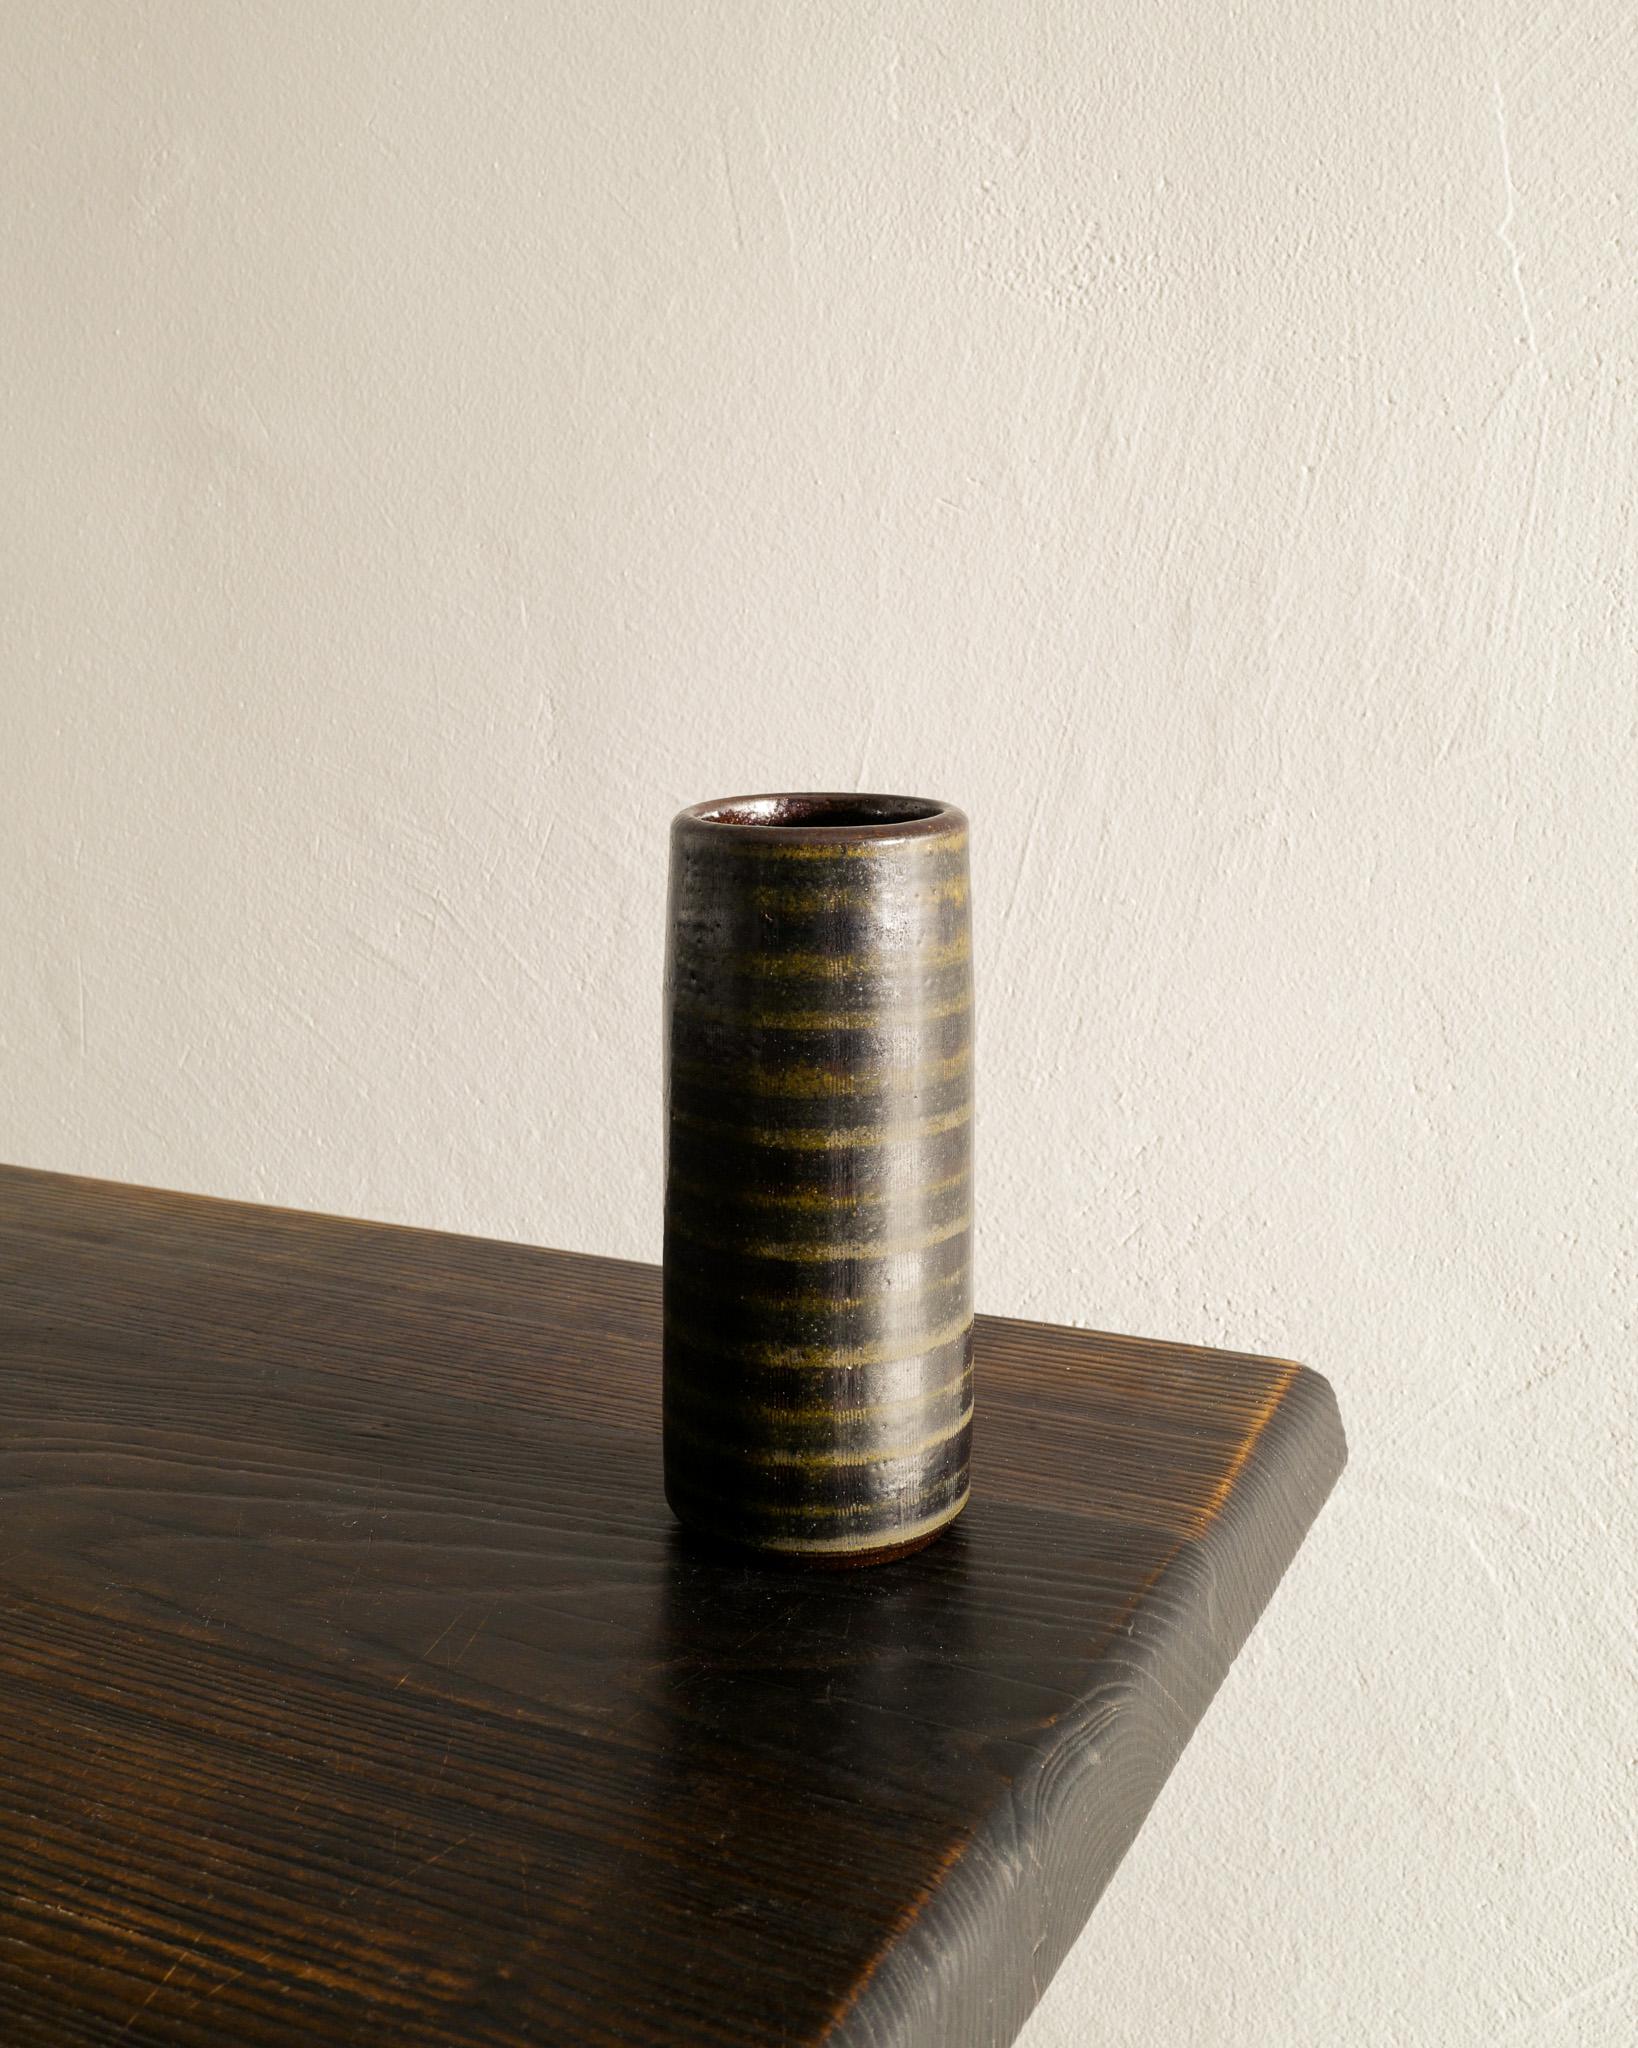 Rare mid century ceramic cylinder vase in dark green, brown and yellow glaze by Arthur Andersson for Wallåkra produced in the 1940s. In good original condition. Signed.

Dimensions: H: 17 cm / 6.7